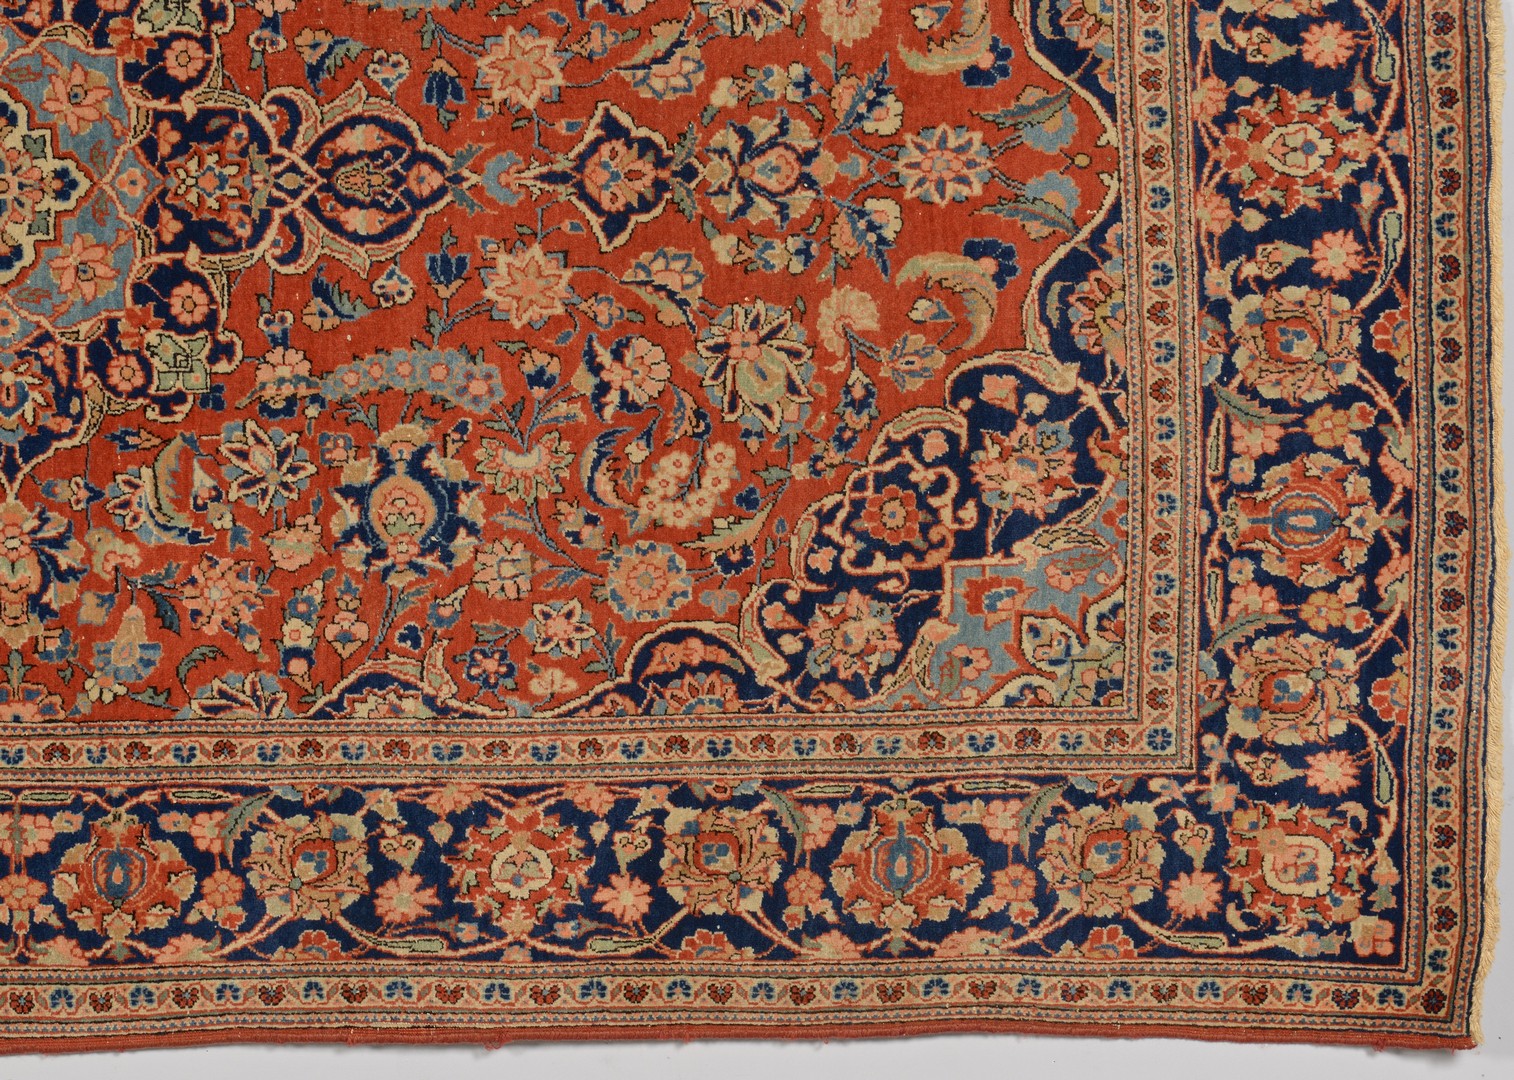 Lot 250: Persian Kashan area rug, early 20th c.